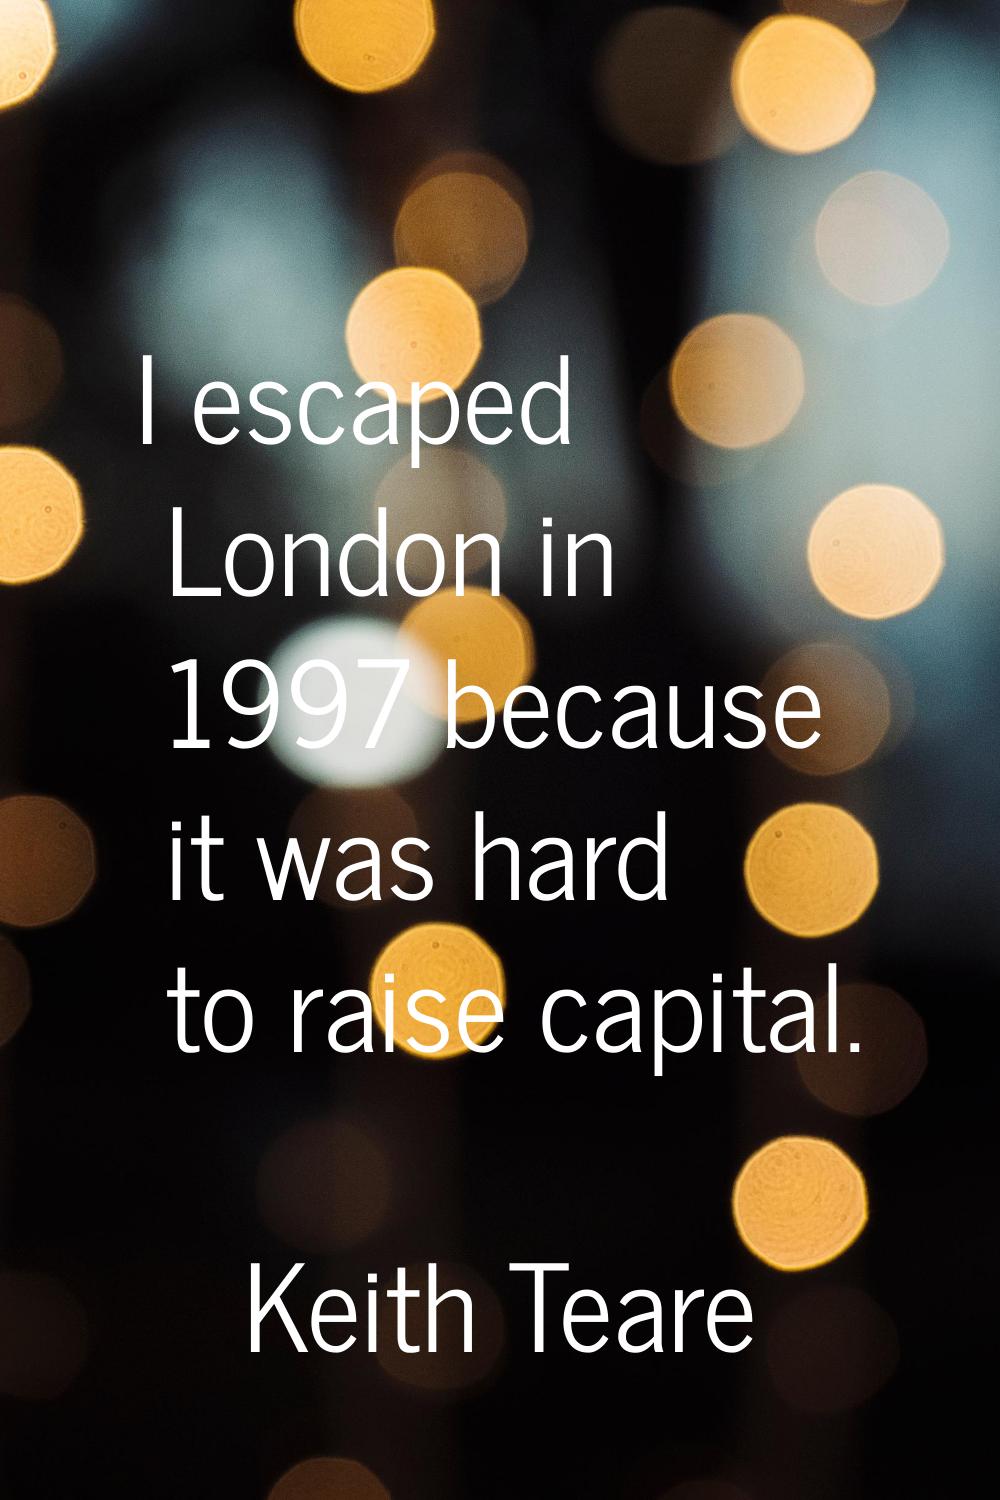 I escaped London in 1997 because it was hard to raise capital.